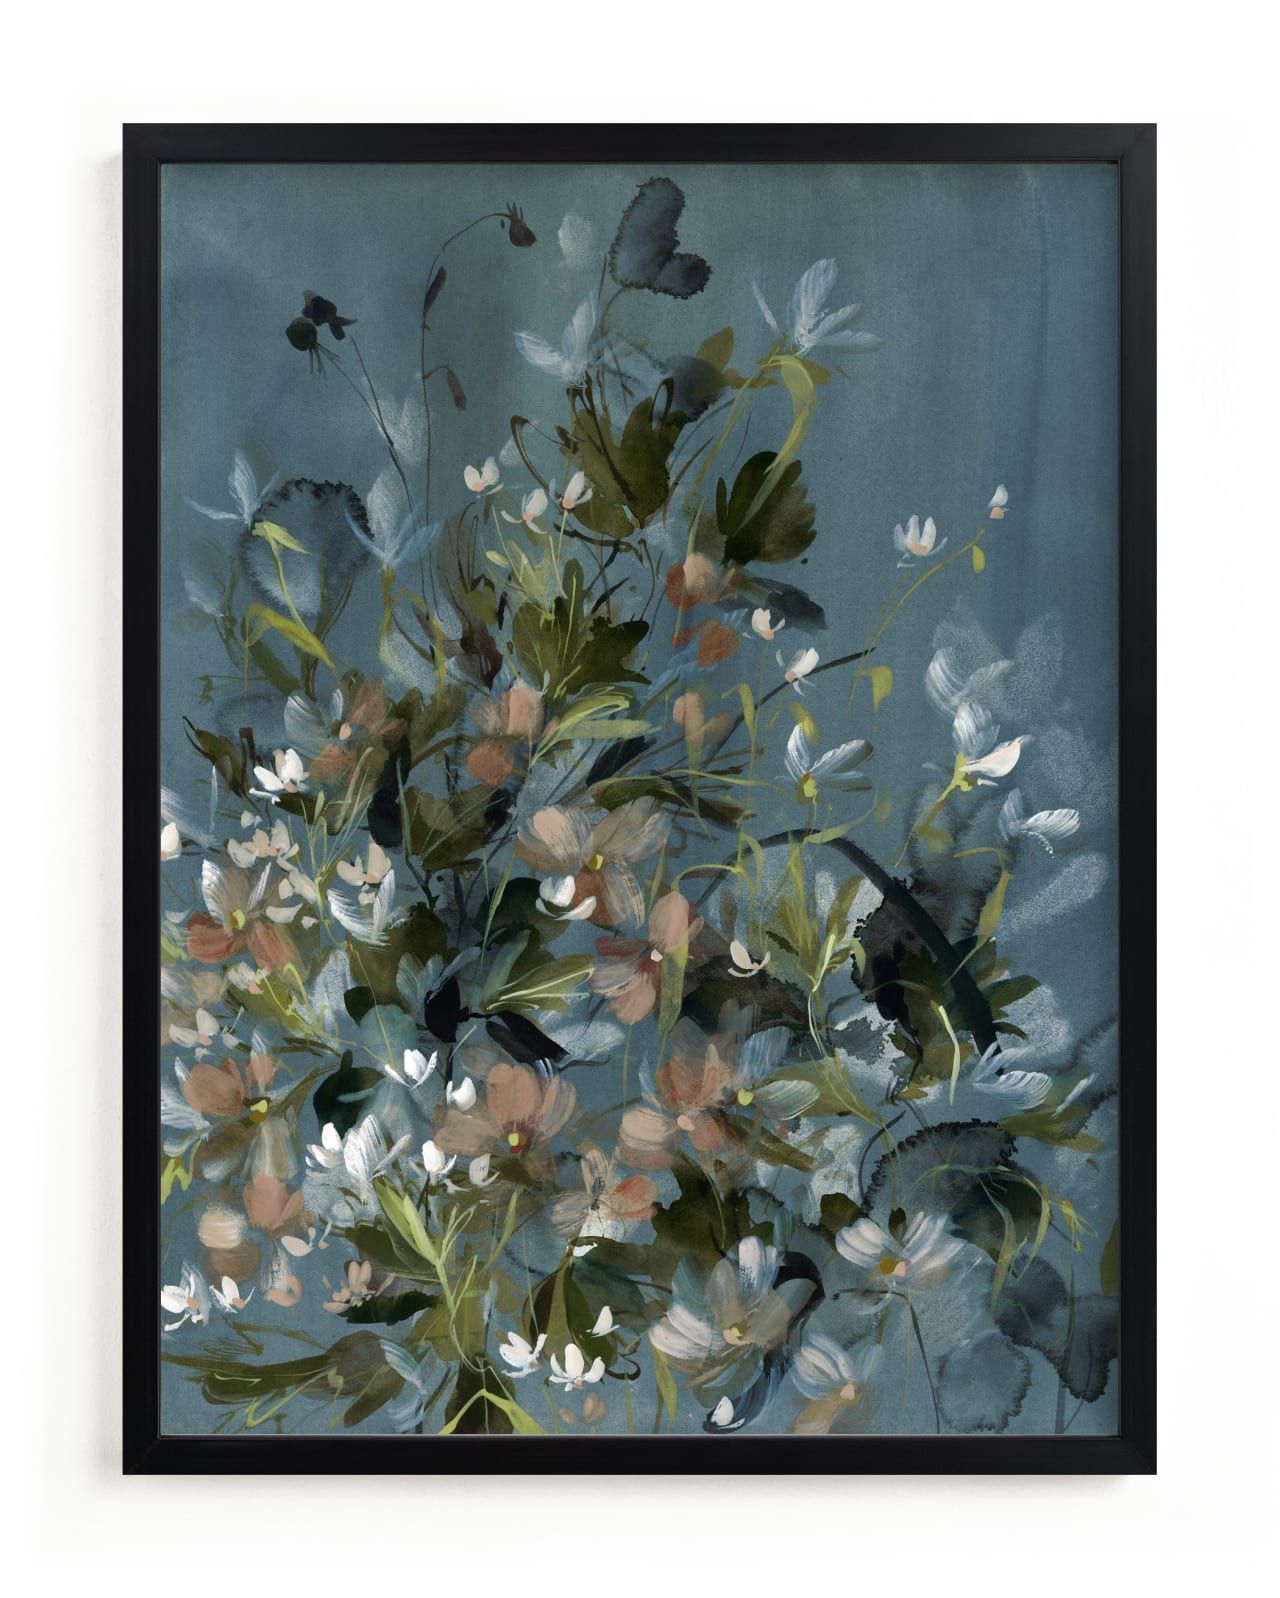 "Hydrangeas at Dusk" - Painting Limited Edition Art Print by Kelly Ventura. | Minted